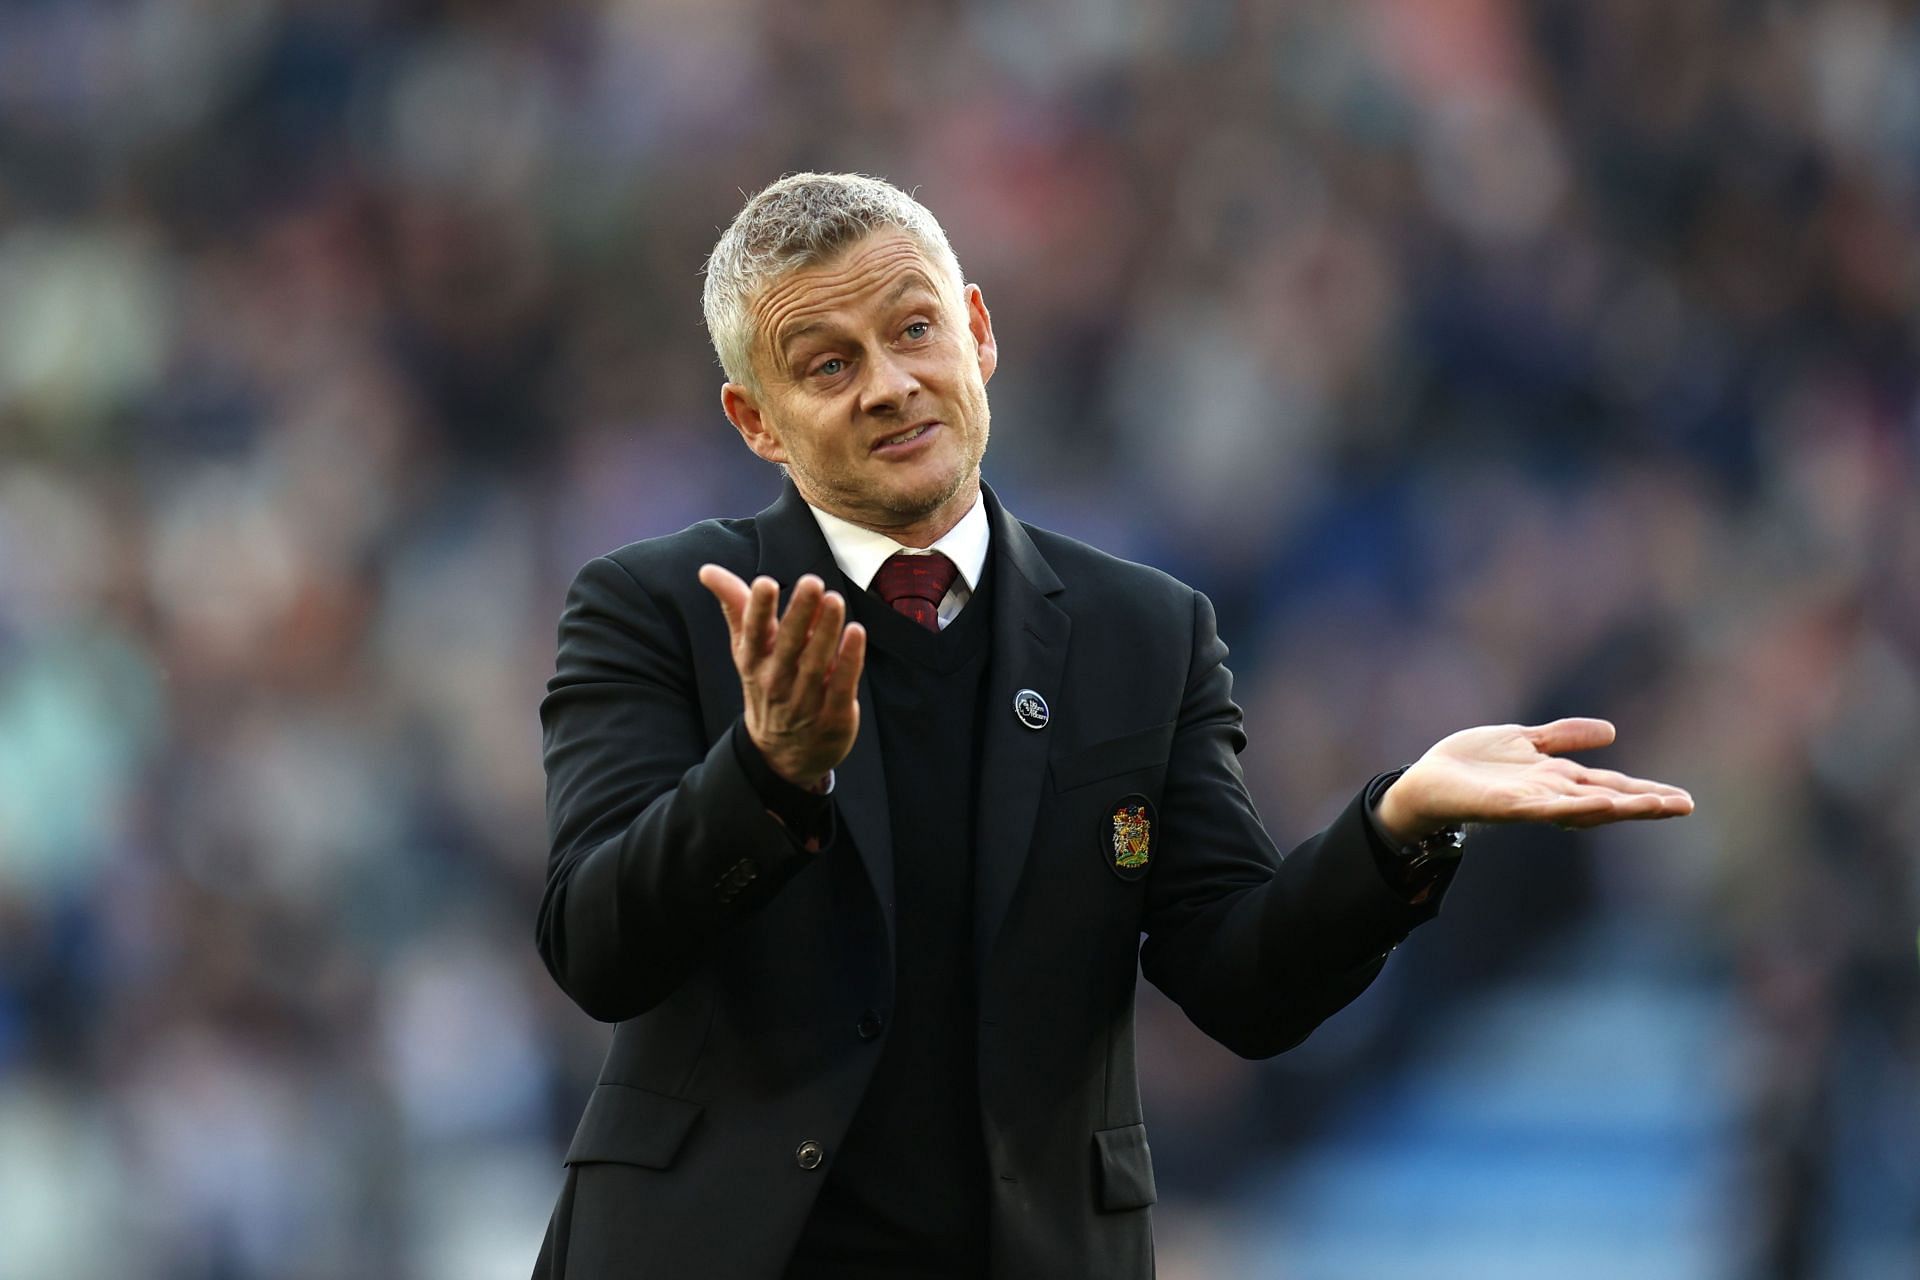 Ole Gunnar Solskjaer is apparently living on borrowed times at Manchester United